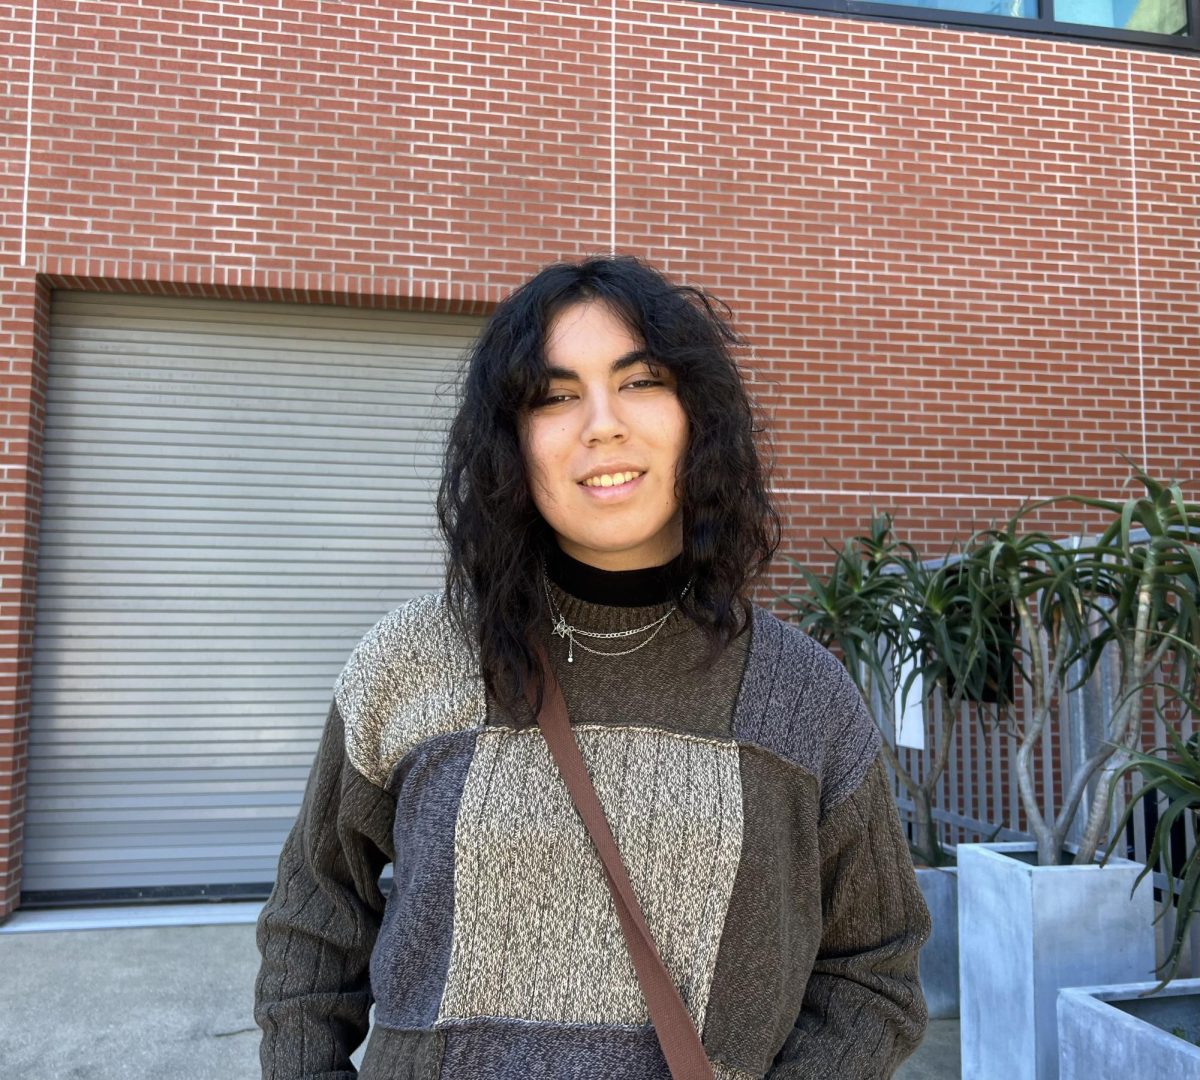 “I think drag is really about self-expression and so is being trans because Im trans. (Drag is) just a big celebration of that self-expression.” - Sasha Baron, City College student